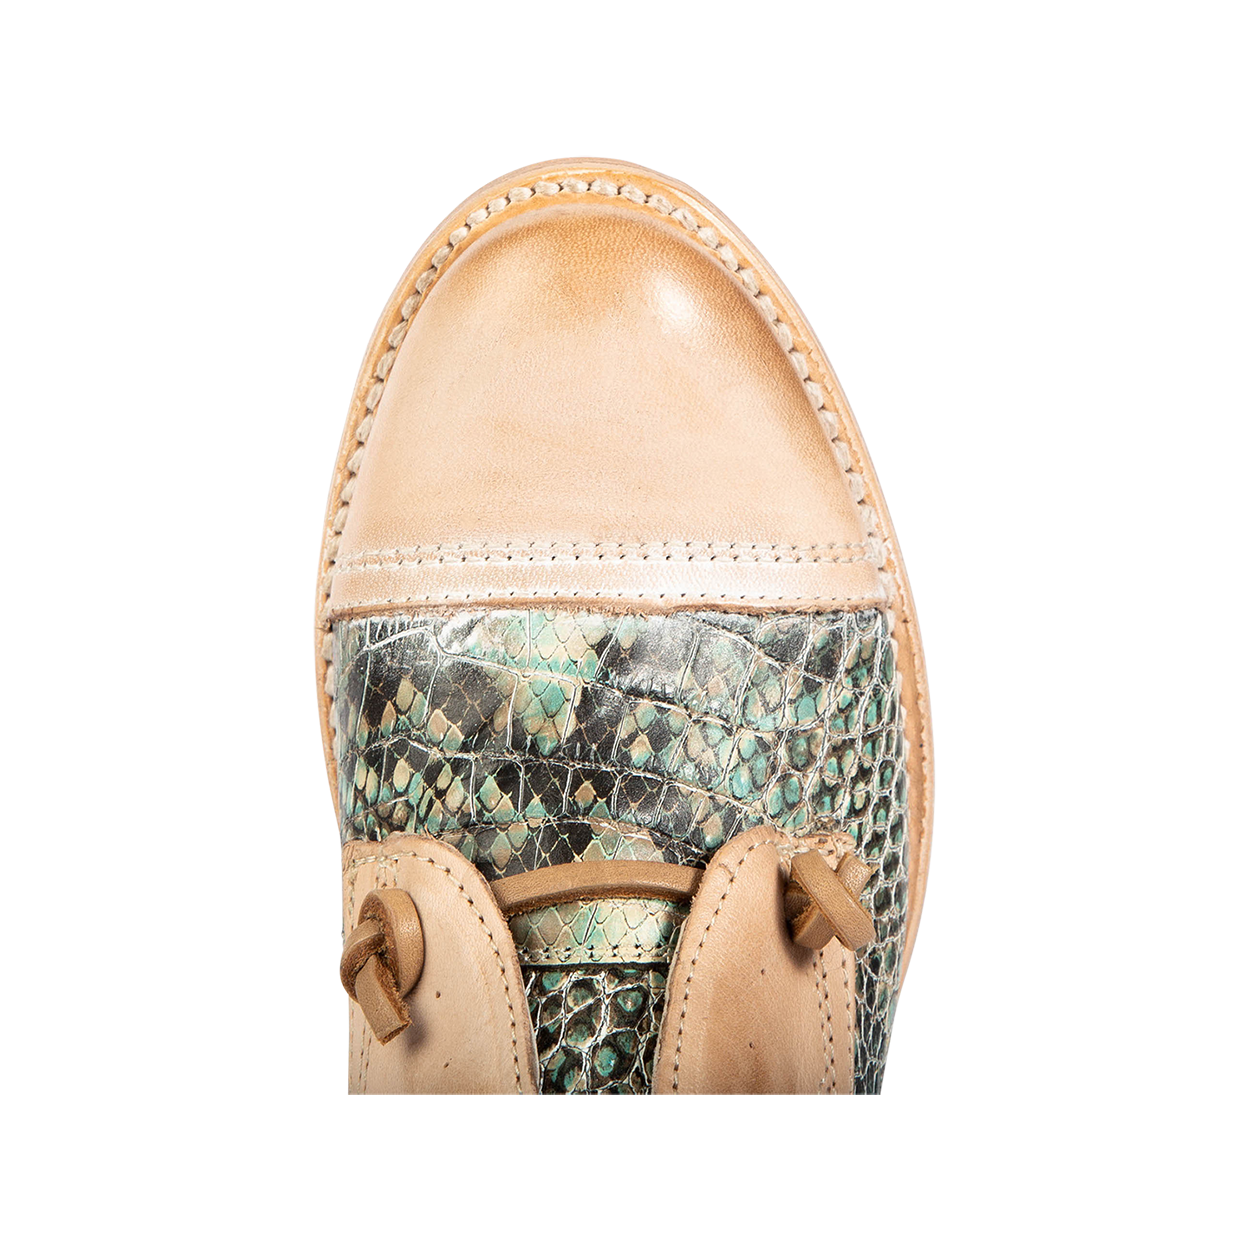 Top view showing almond toe and decorative knotted leather lace on FREEBIRD women's Mabel turquoise multi shoe